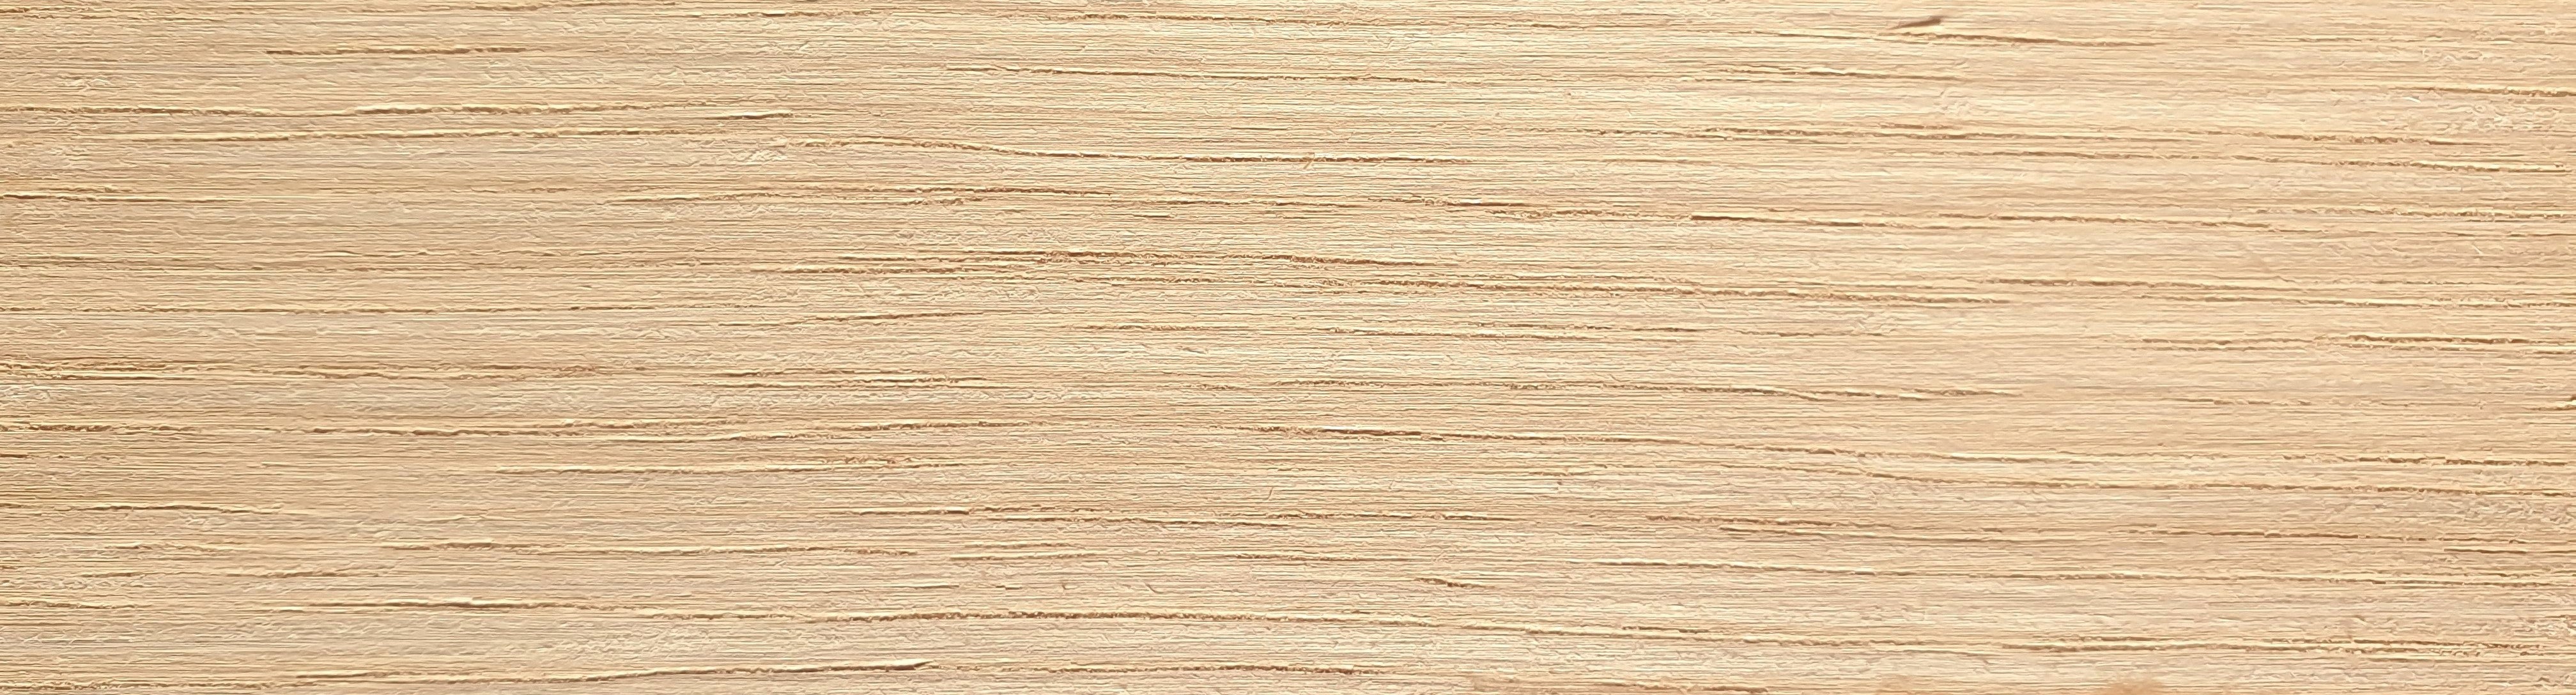 AMERICAN WHITE OAK Pre-glued Iron On Real Wood Edging 18mm Wide